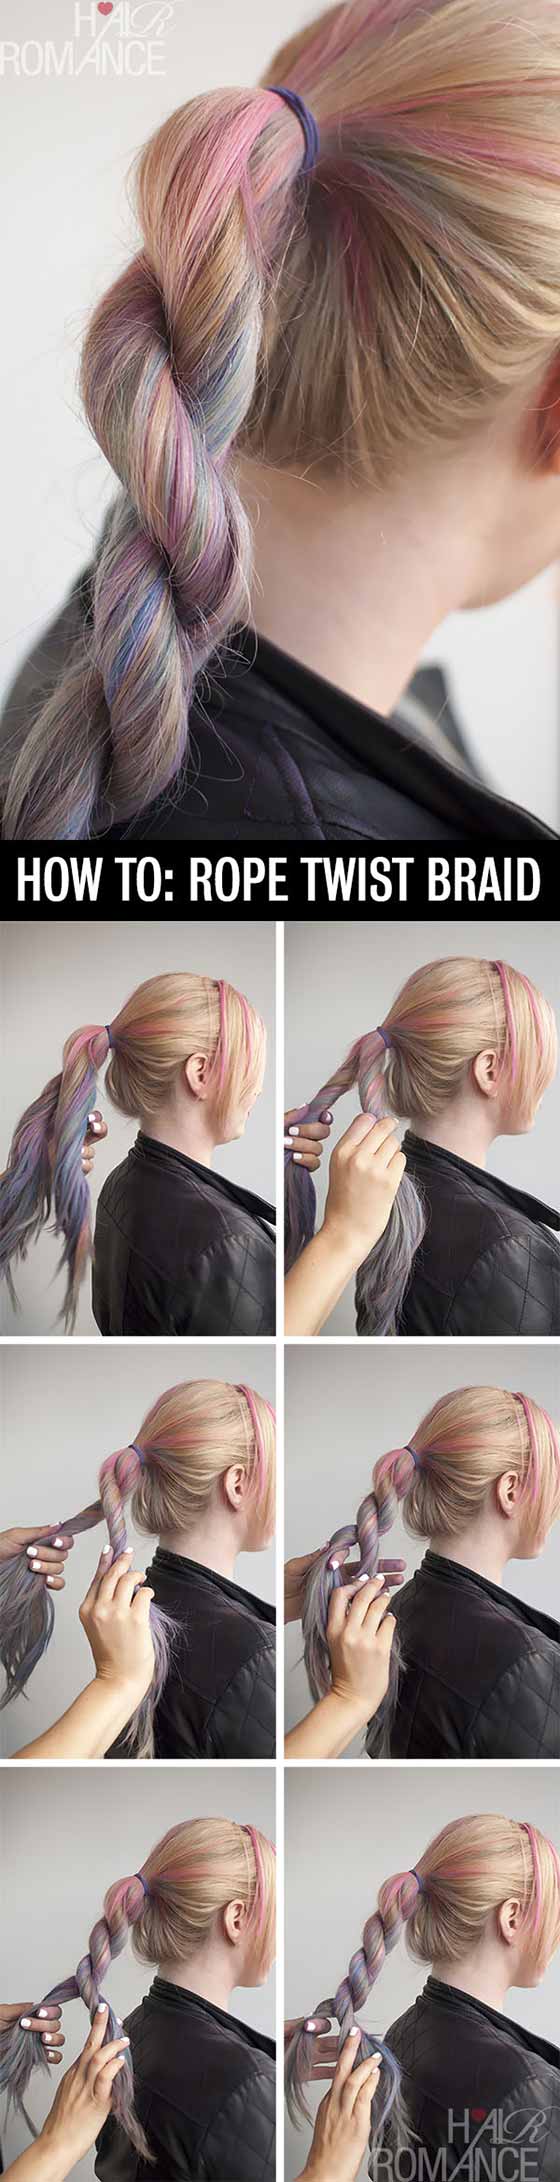 Rope twist braided hairstyle for long hair